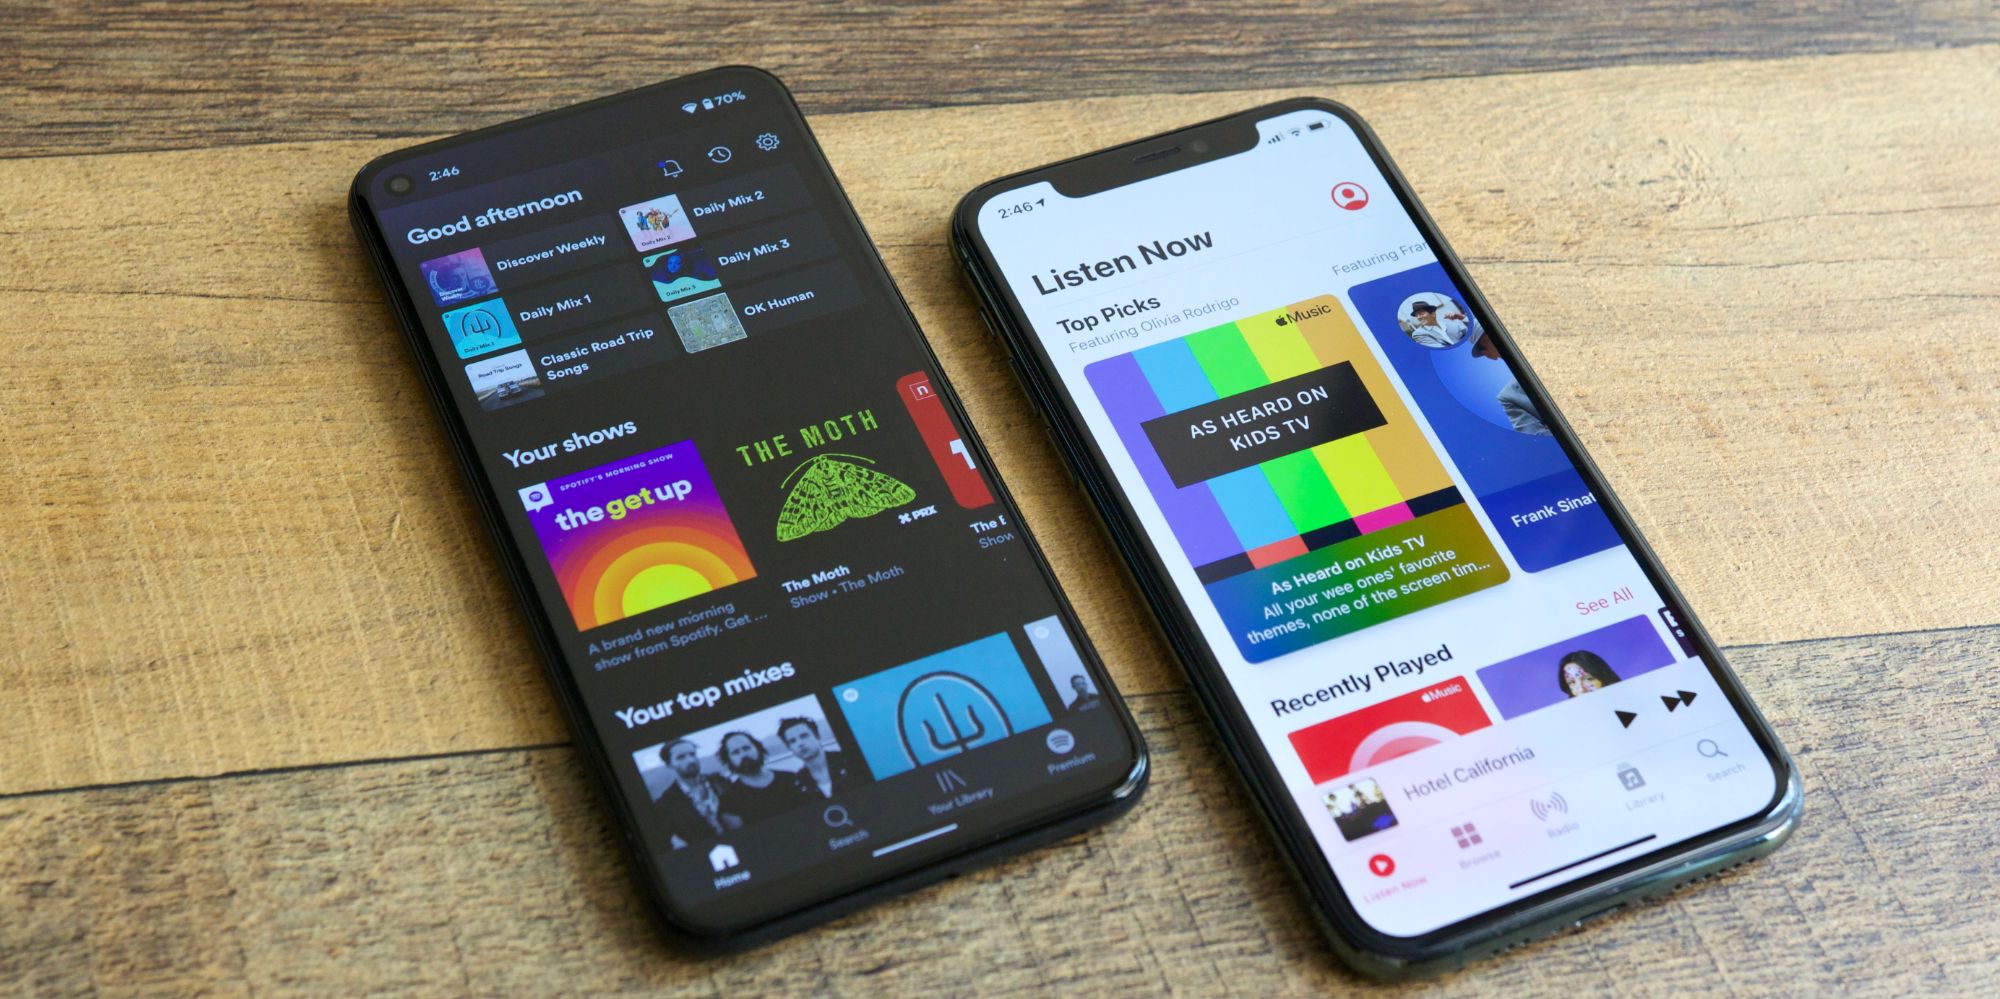 Apple Music and Spotify apps running next to each other